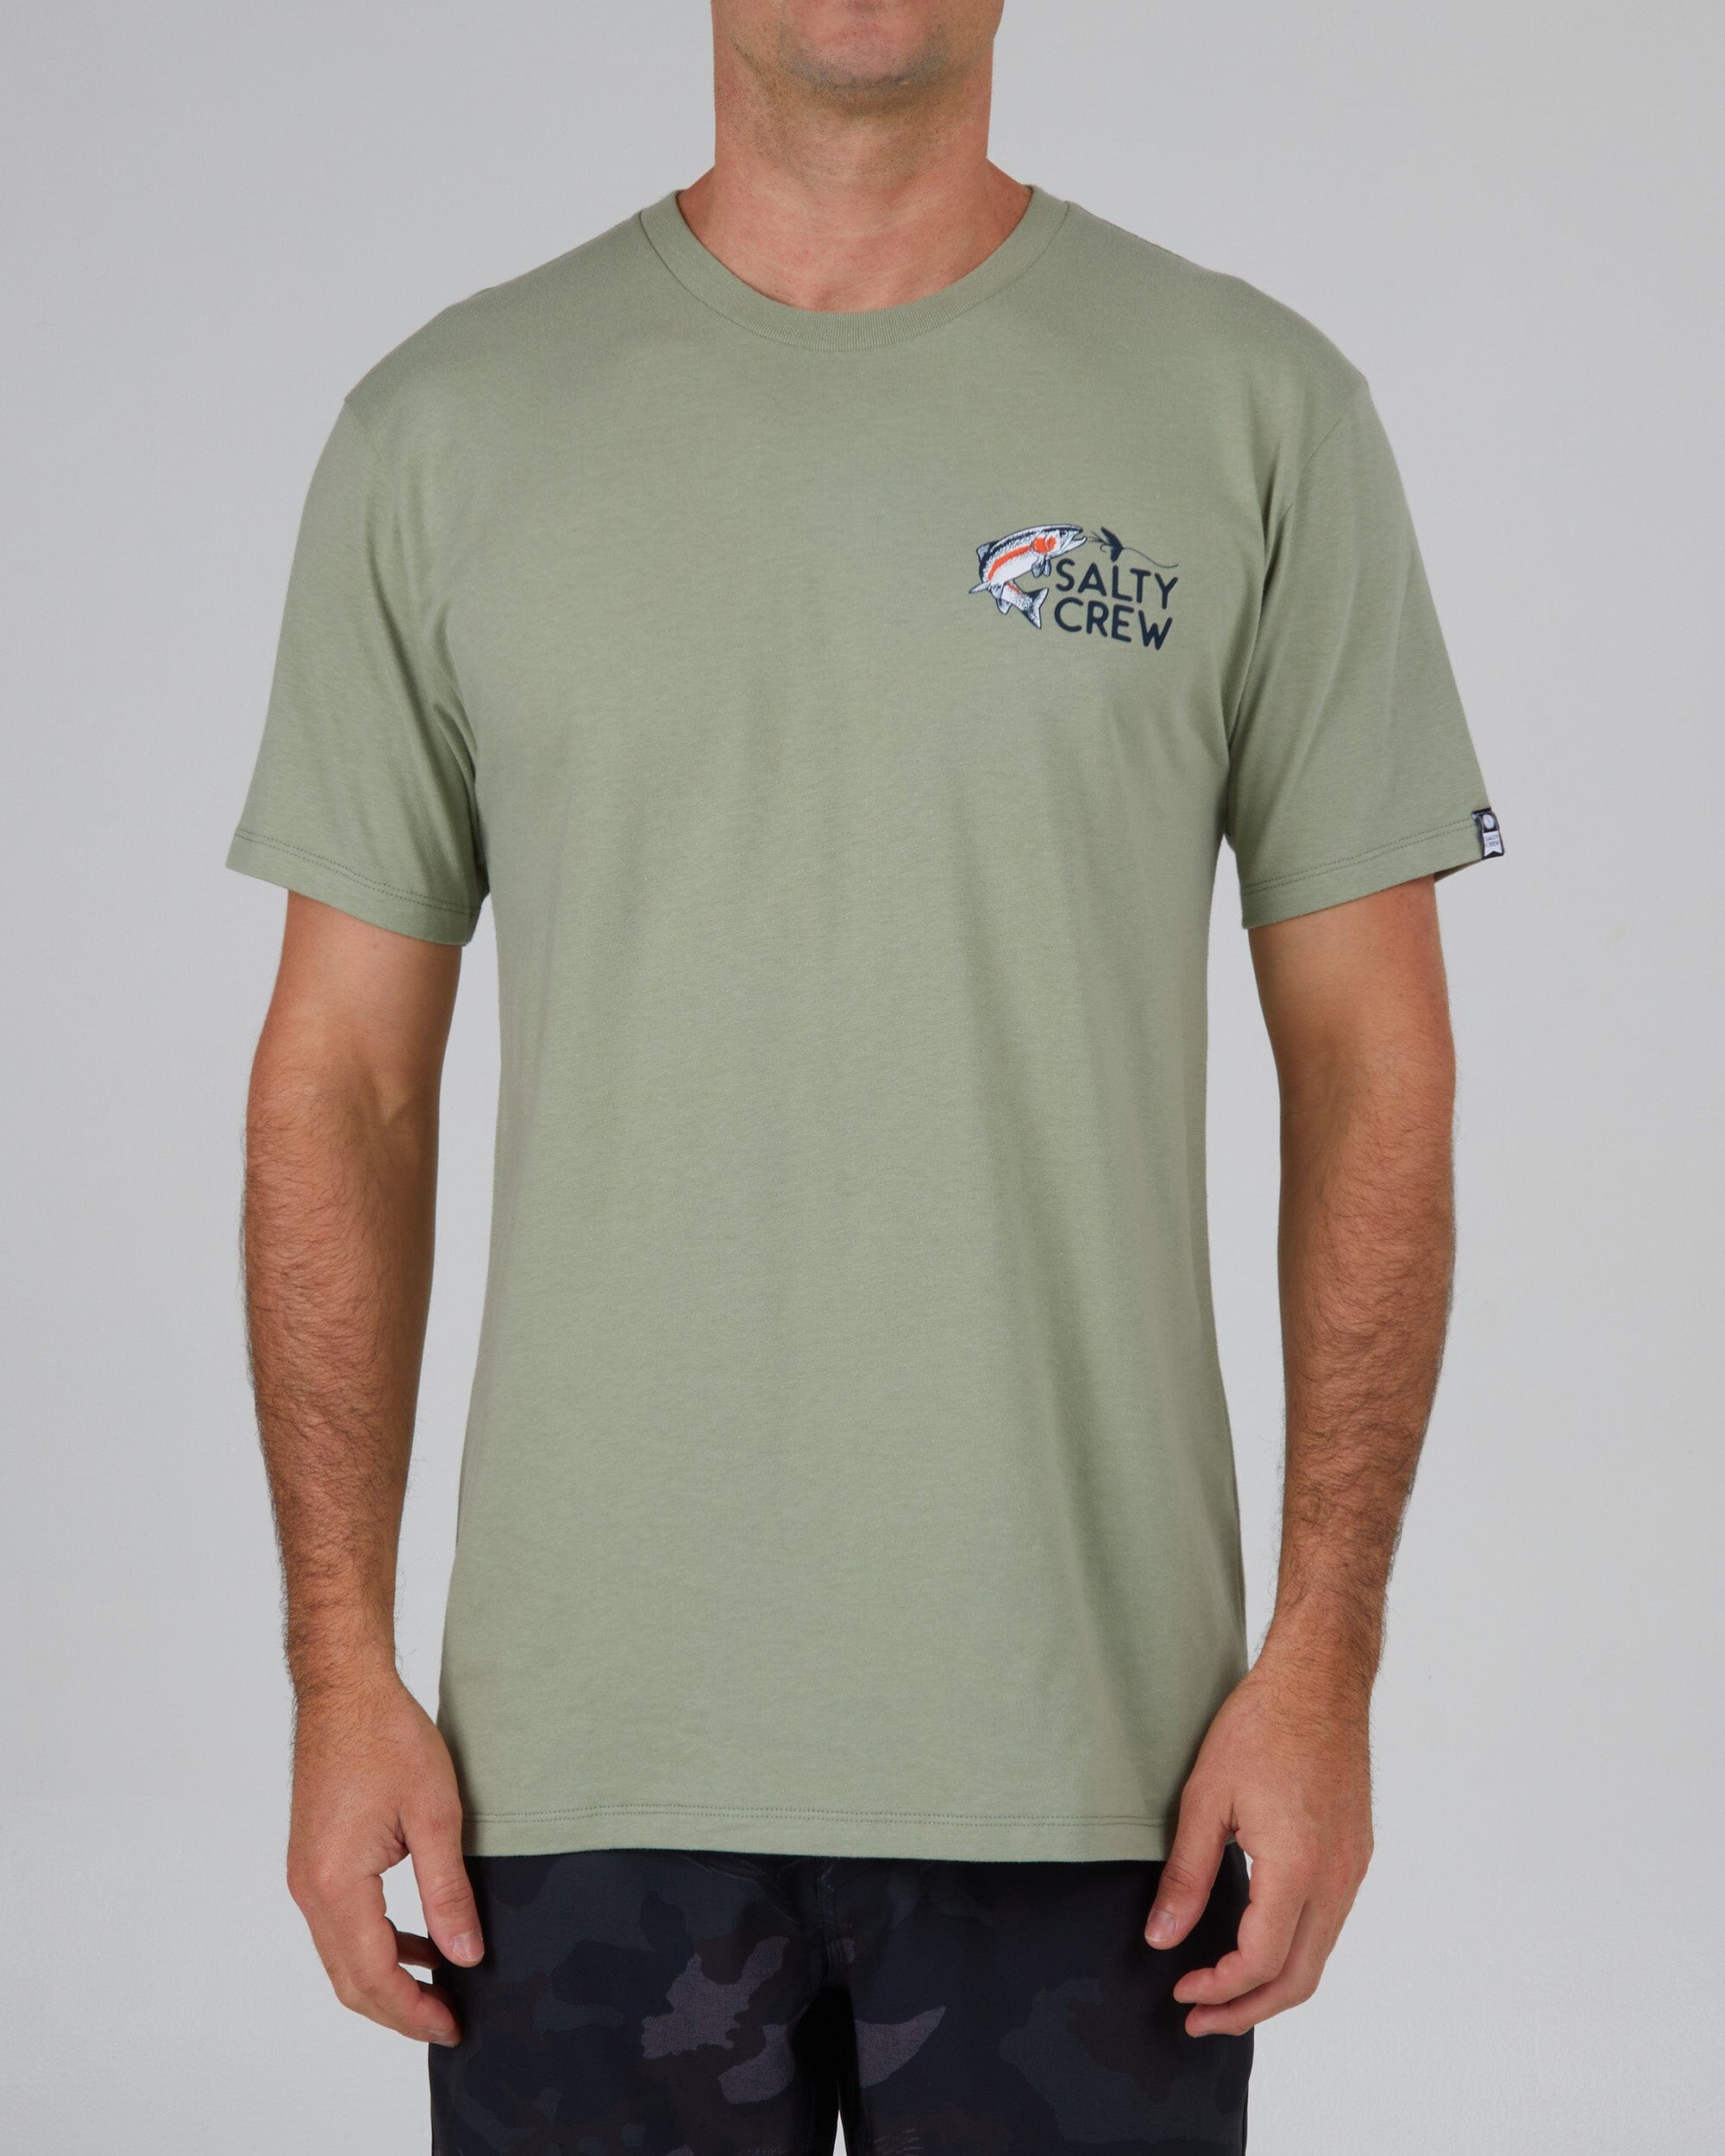 SALTY CREW Fly Trap T-Shirt Dusty Sage Men's Short Sleeve T-Shirts Salty Crew 